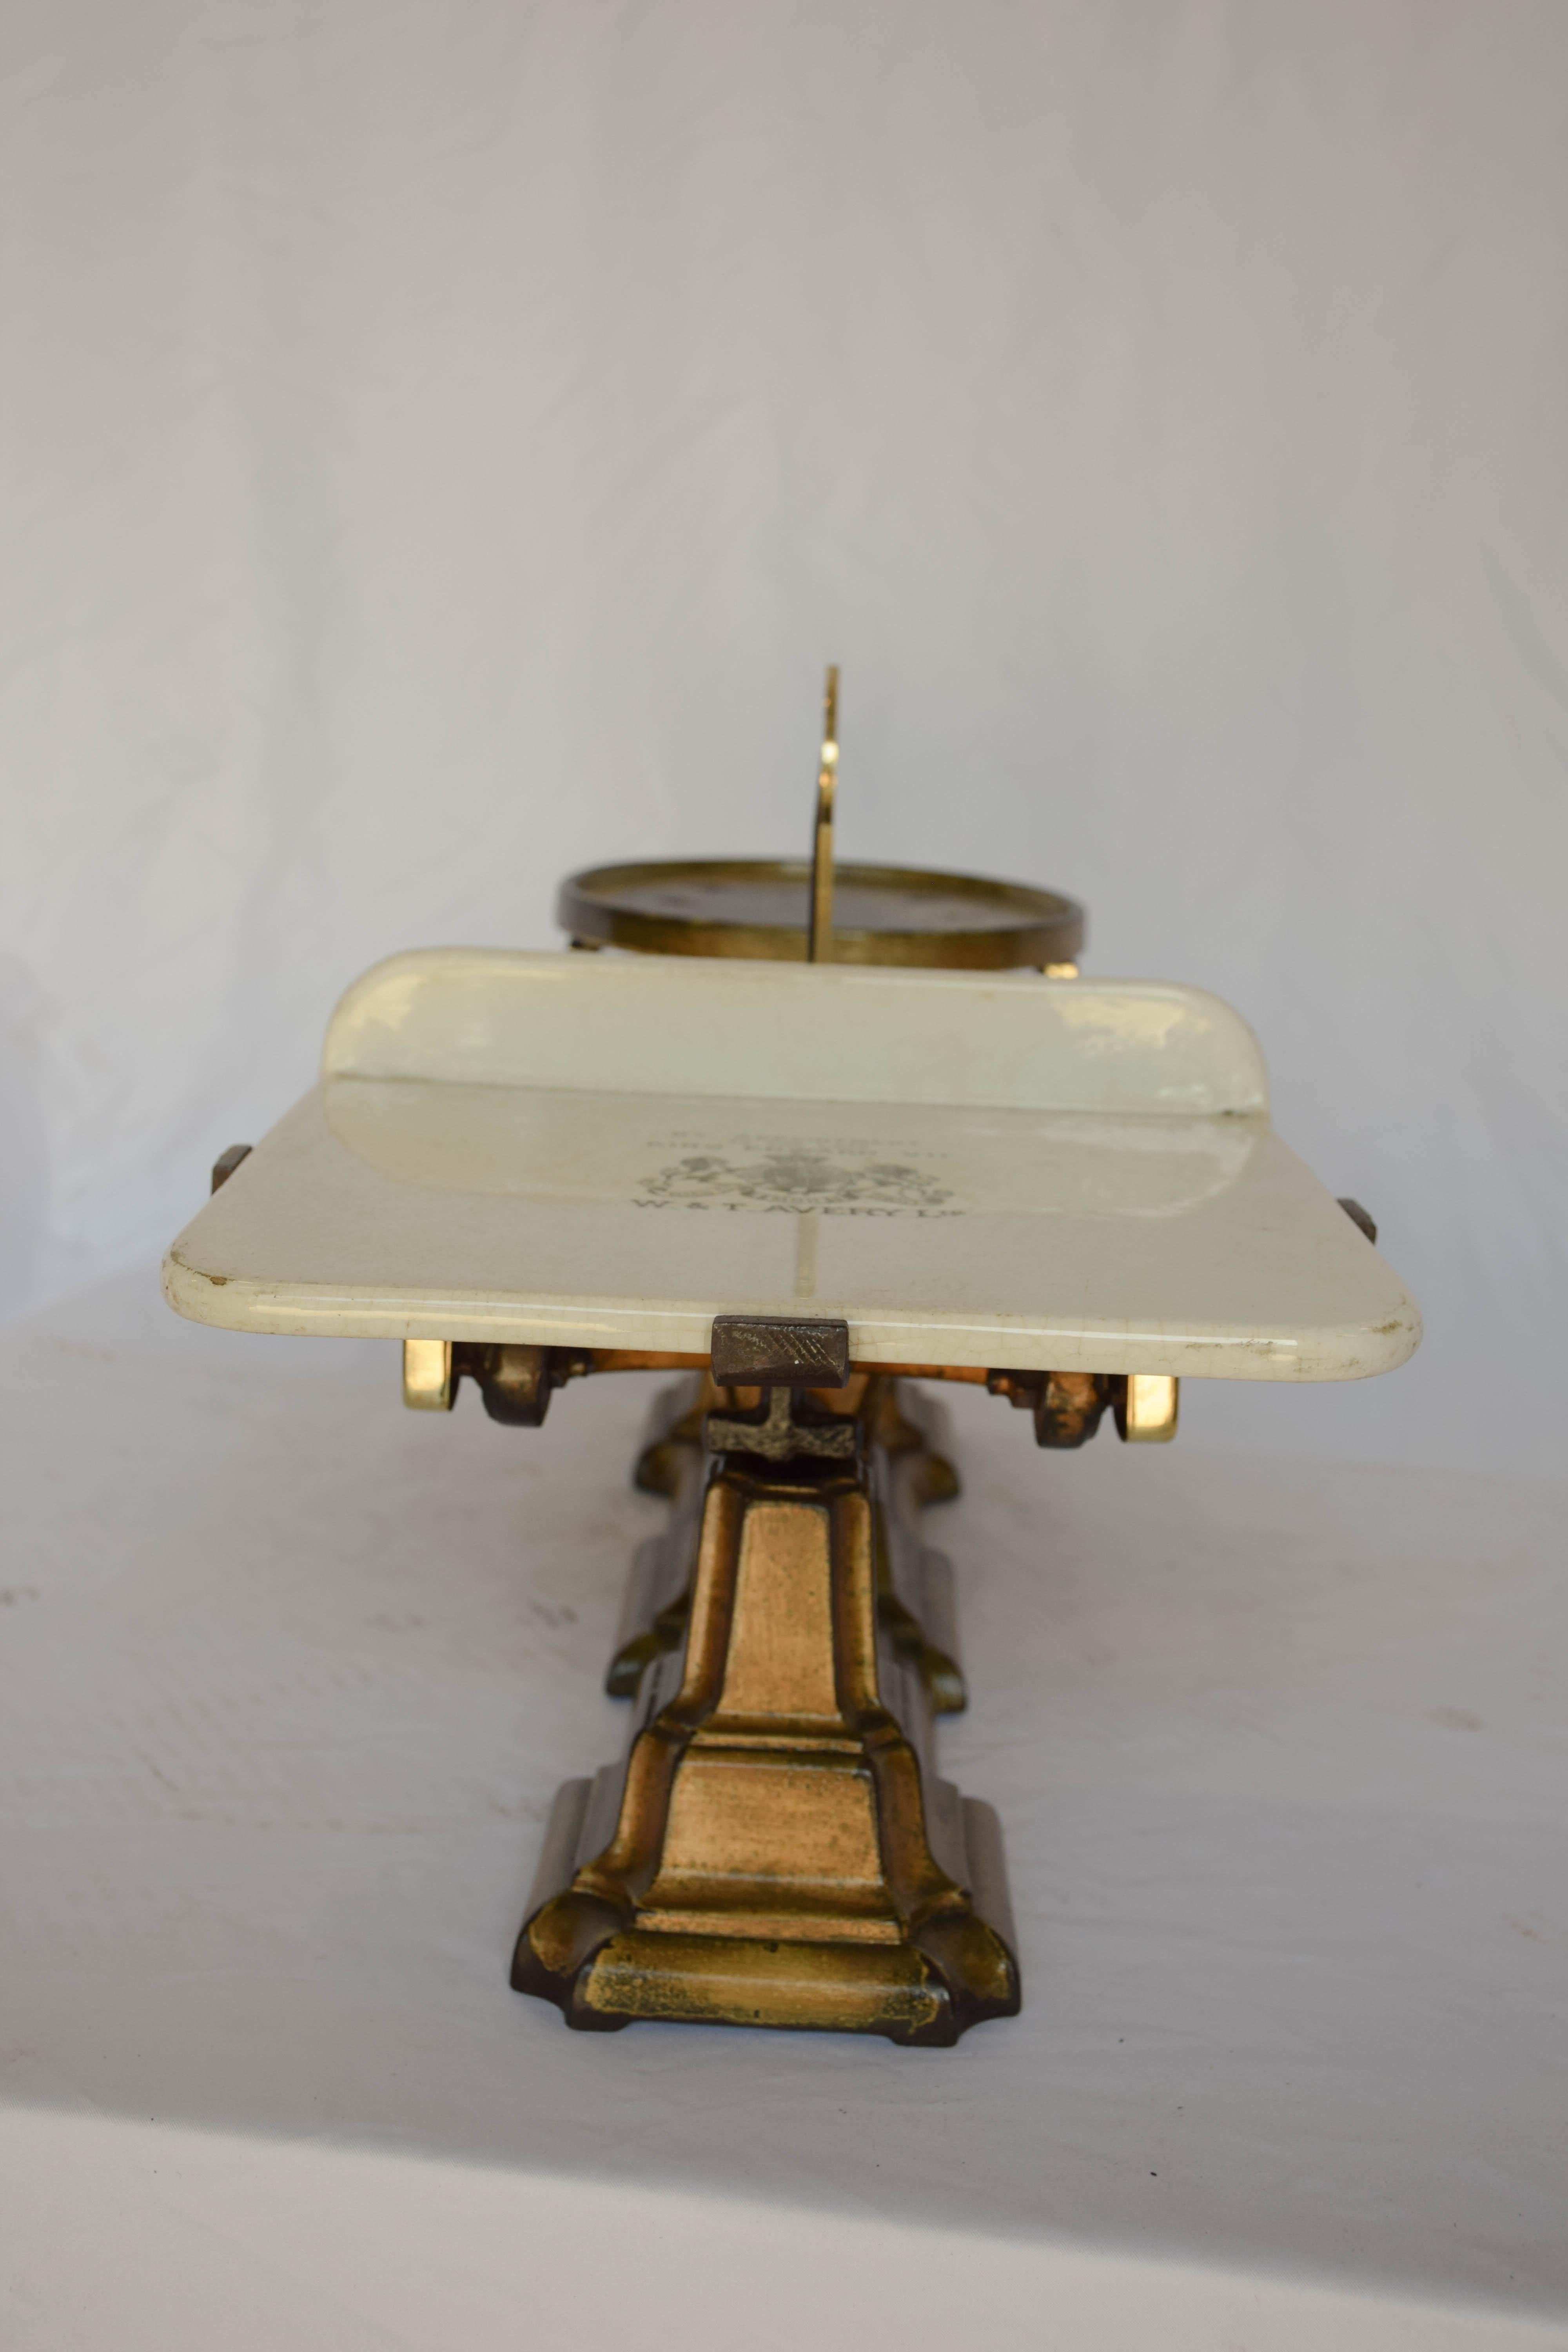 Antique Wrought Iron Weight Balance Scale by W and T Avery Ltd. 1